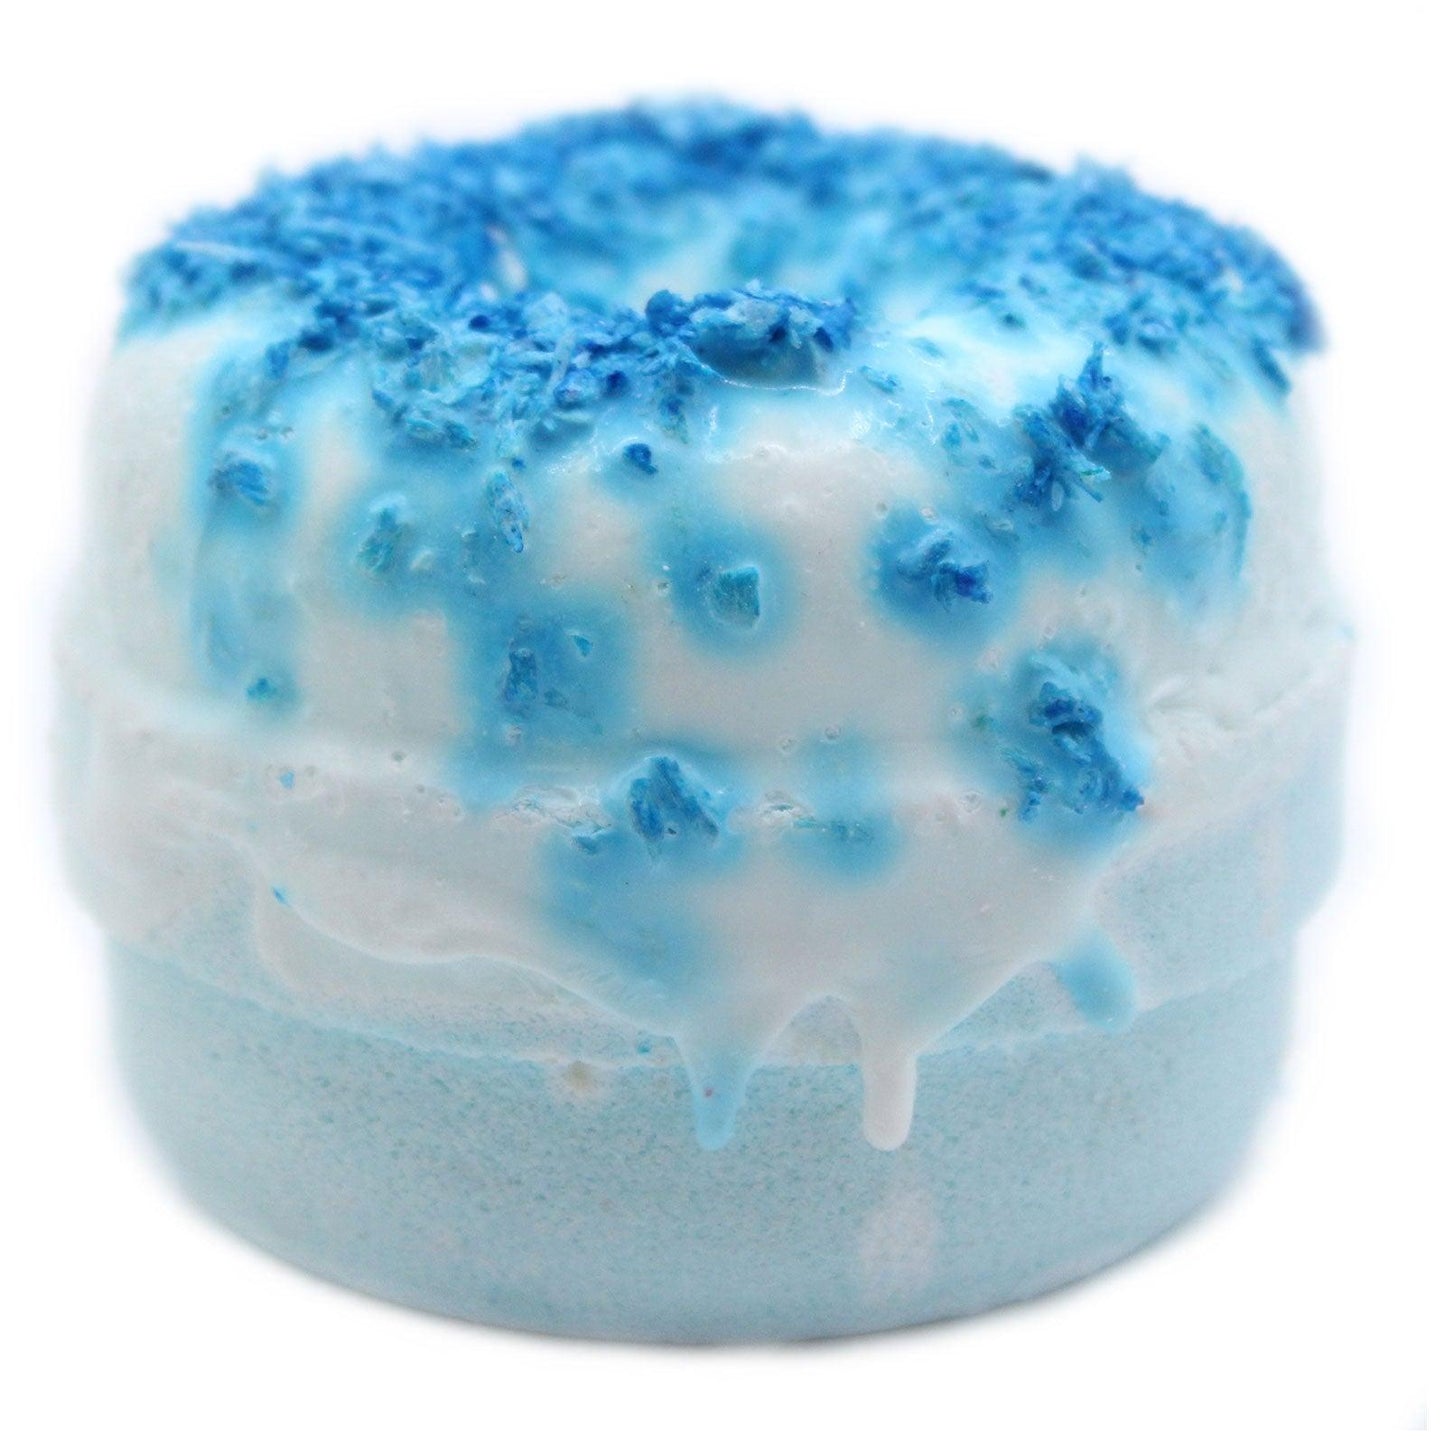 Set of 2 Scented Donut Bath Bomb Fizzers - Blueberry